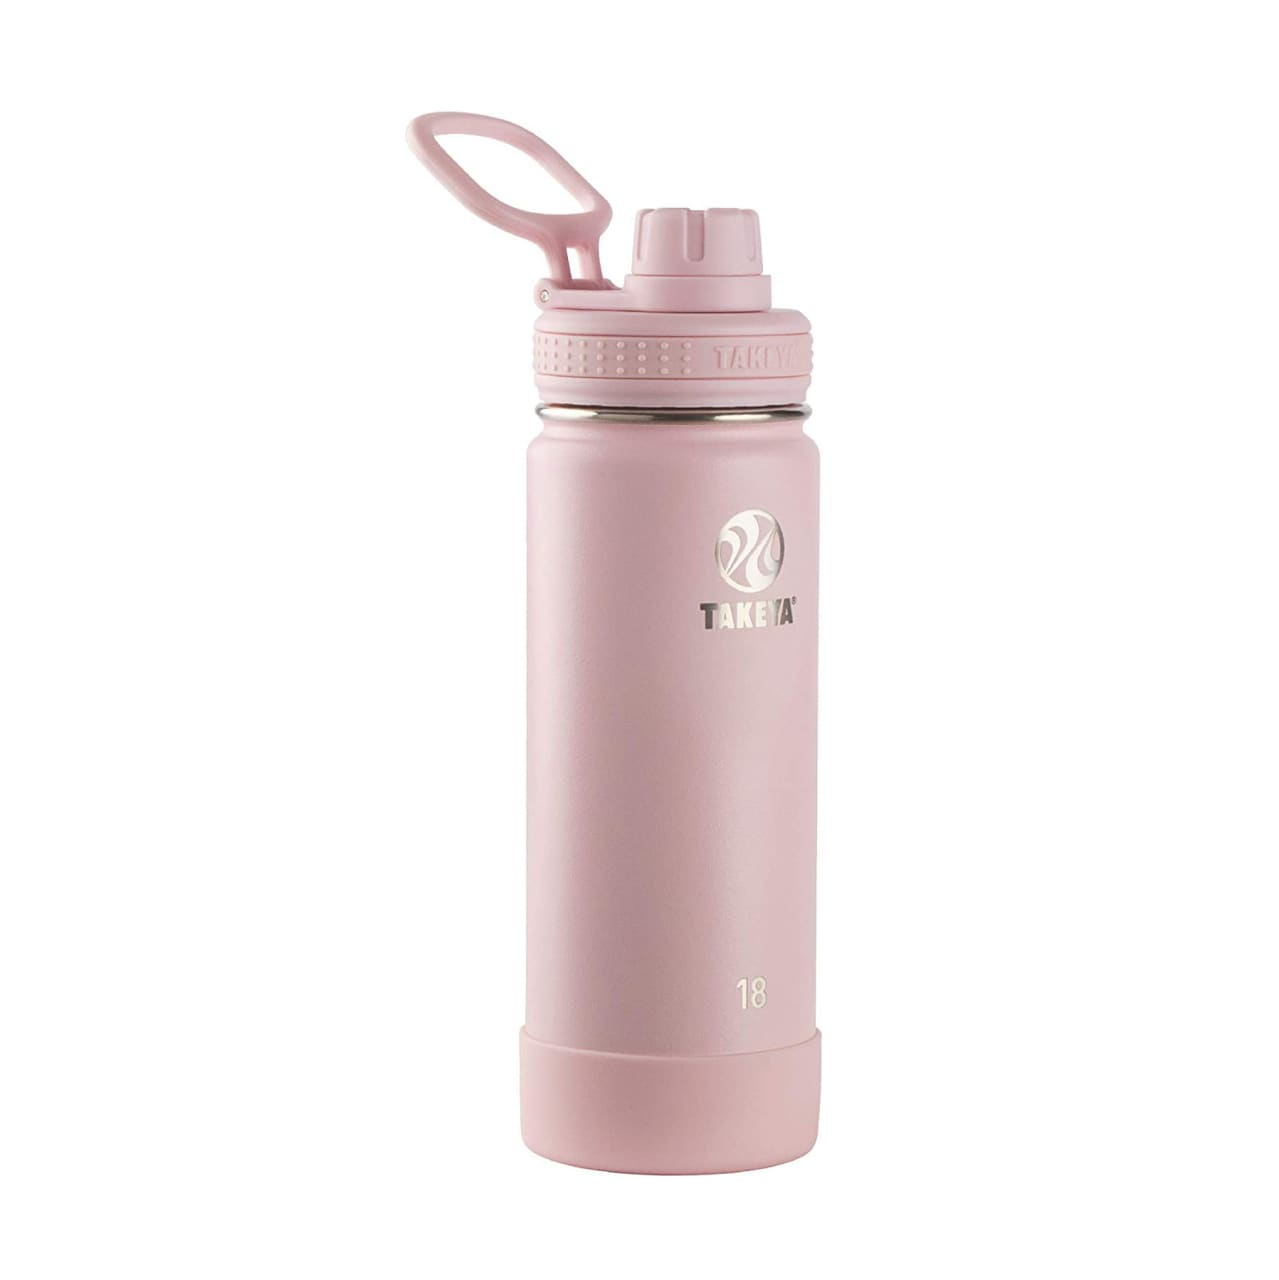 Actives Insulated Water Bottle with Spout Lid 